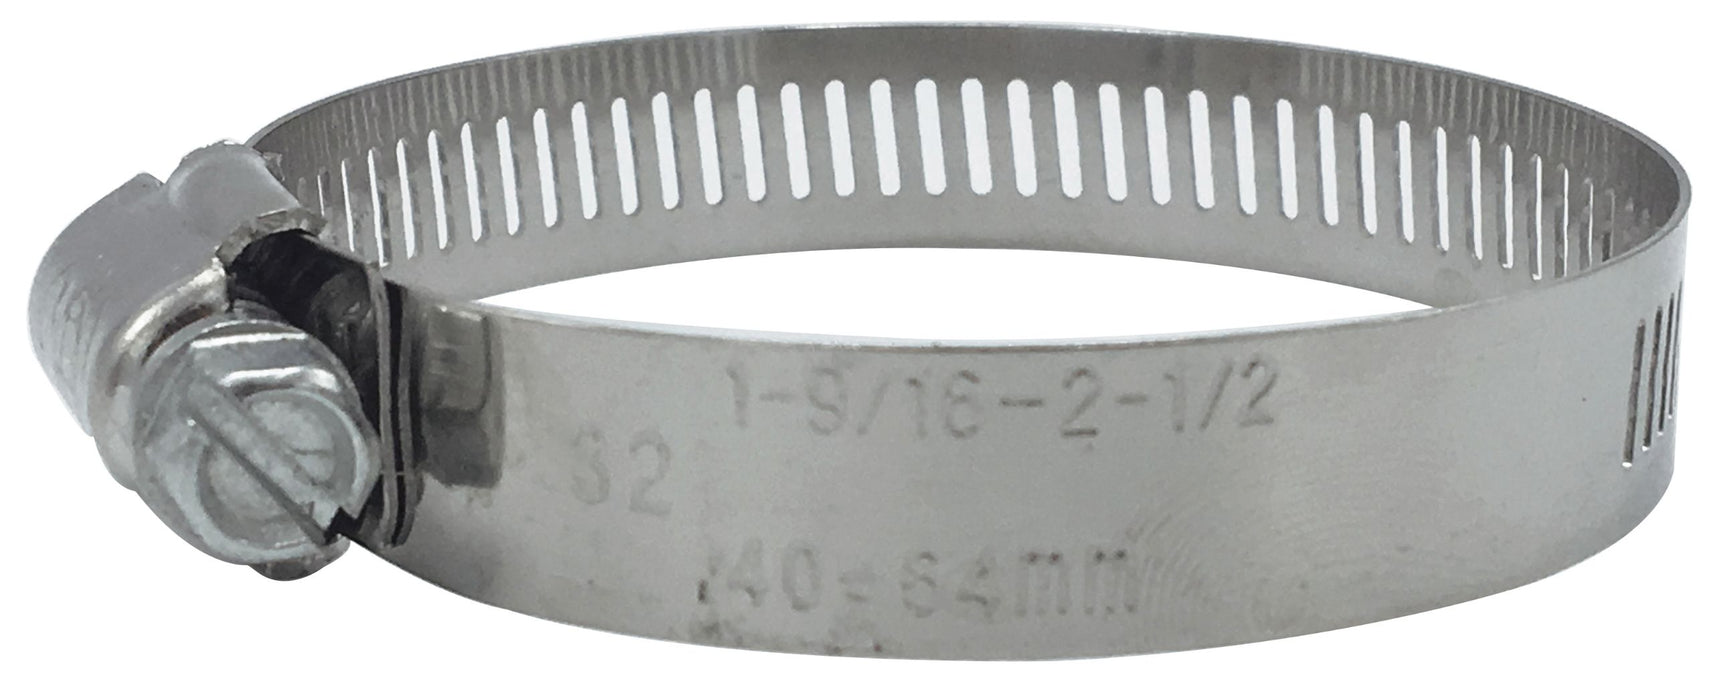 #40 2 1/2" Stainless Hose Clamp With Carbon Screw